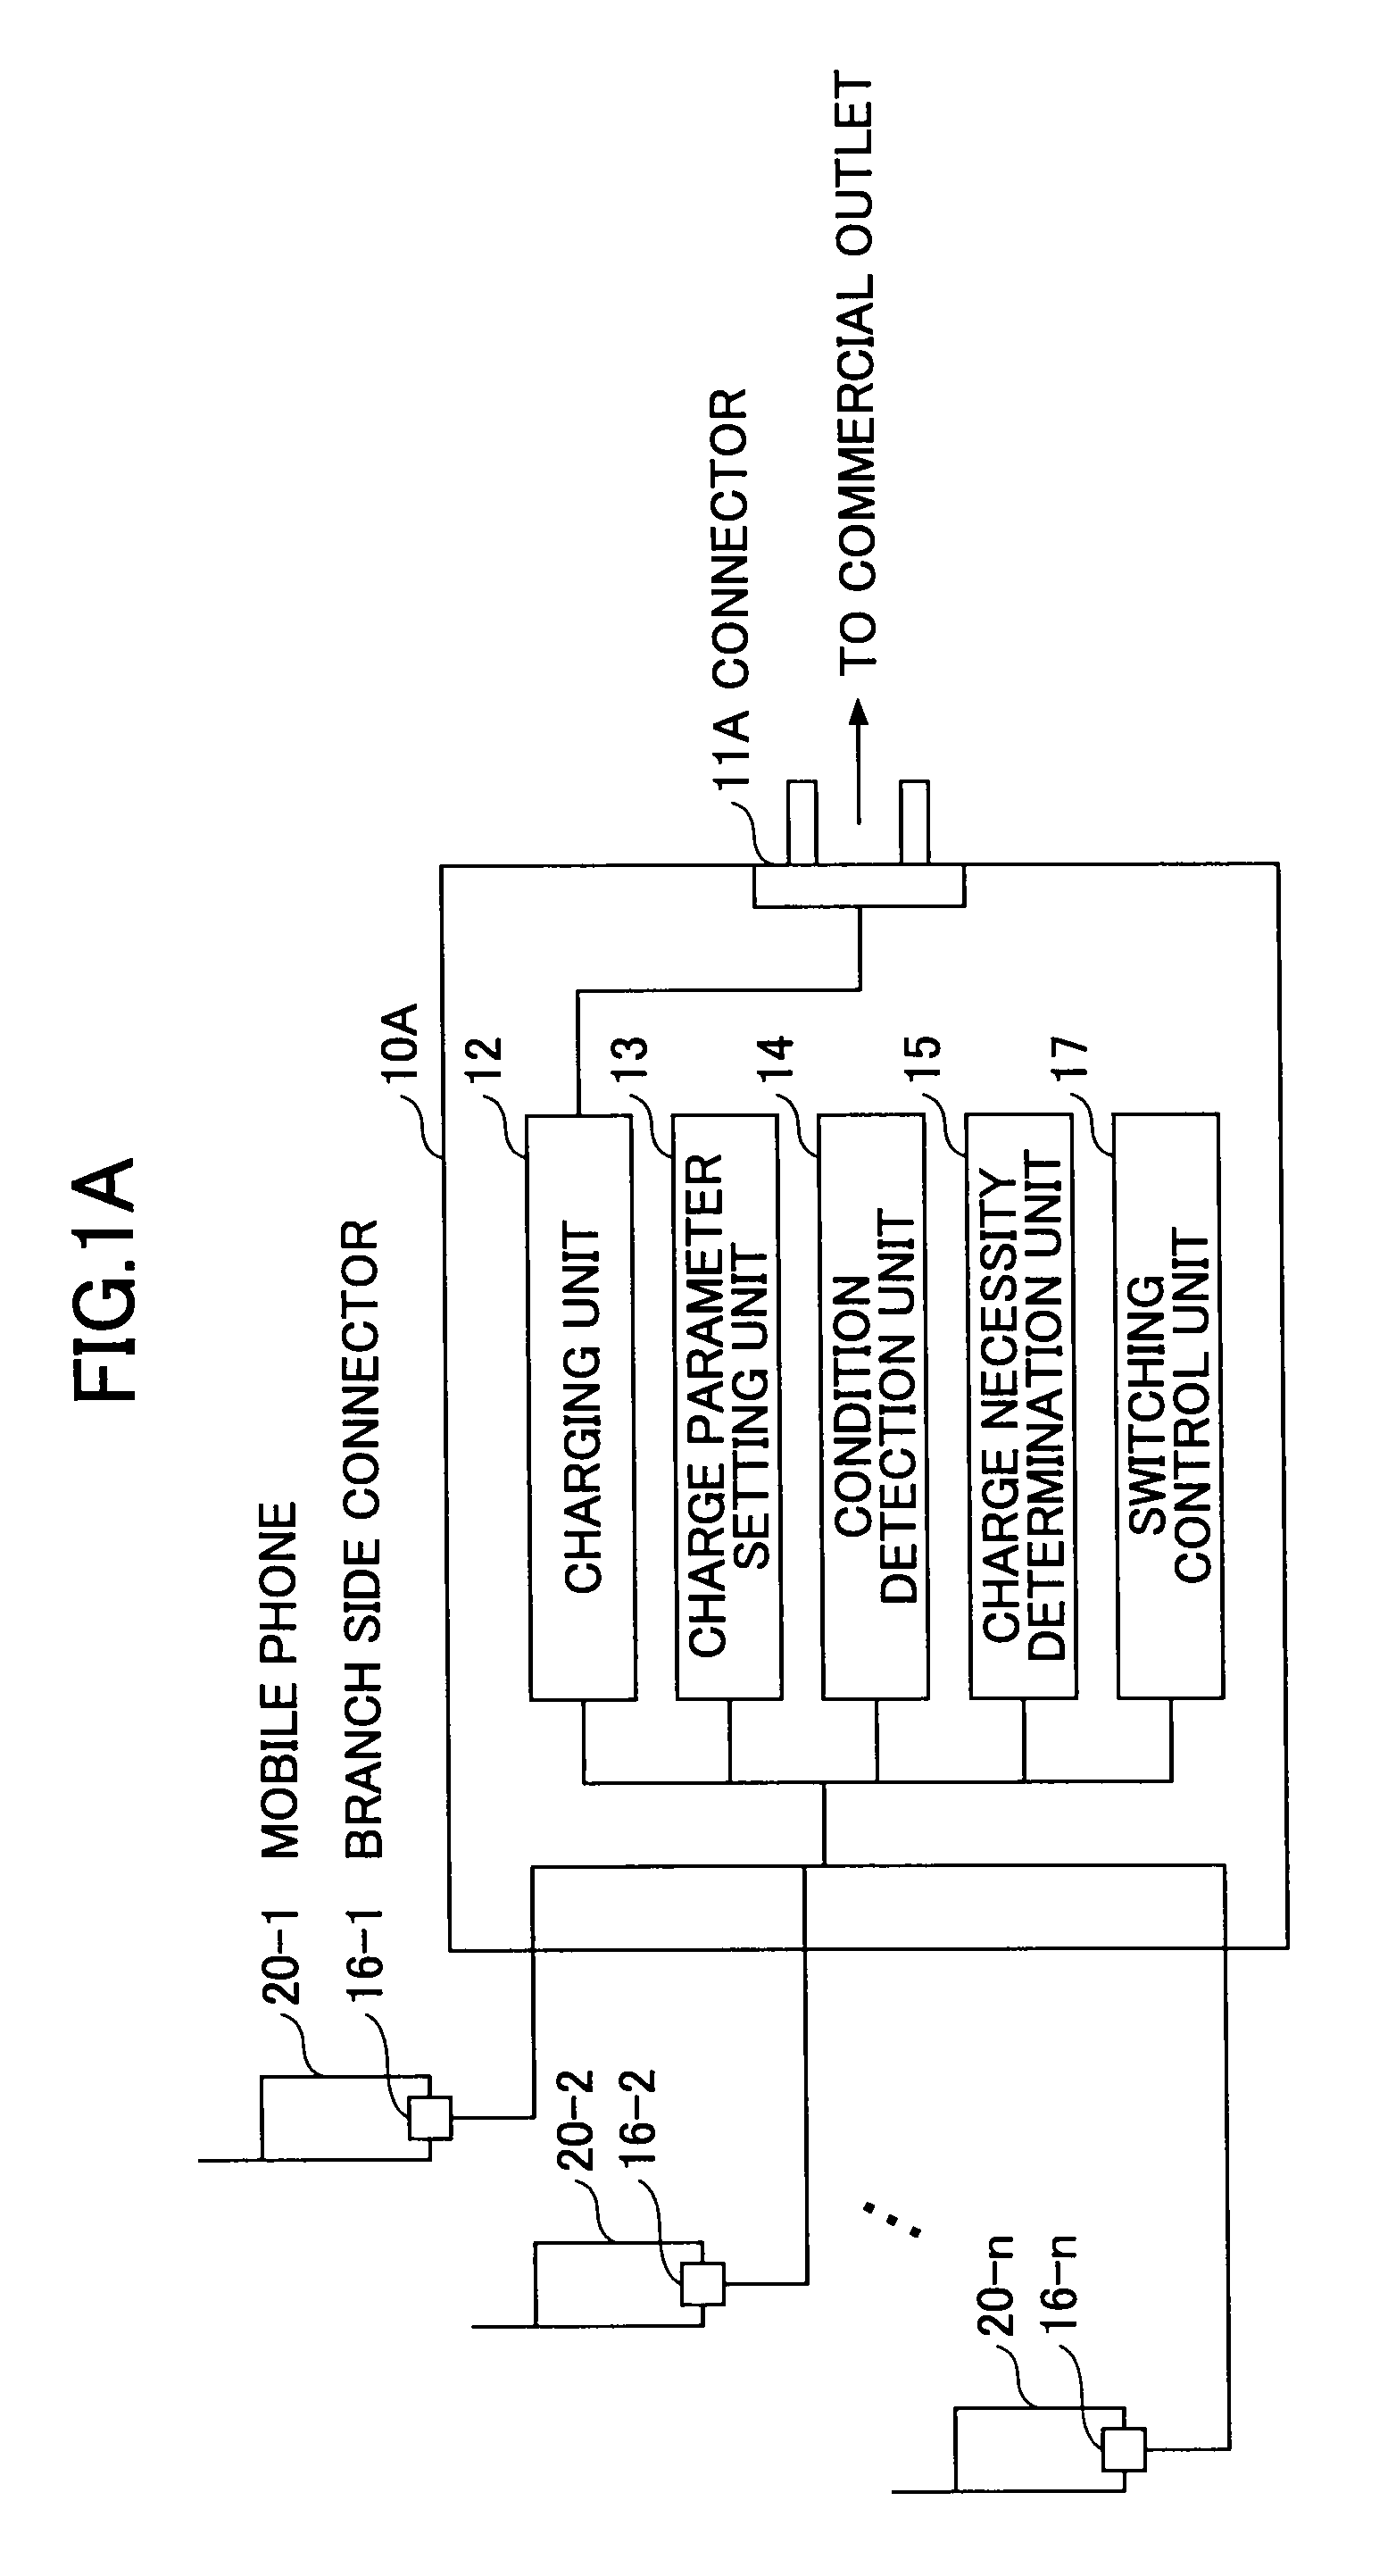 Battery charger for multiple mobile devices